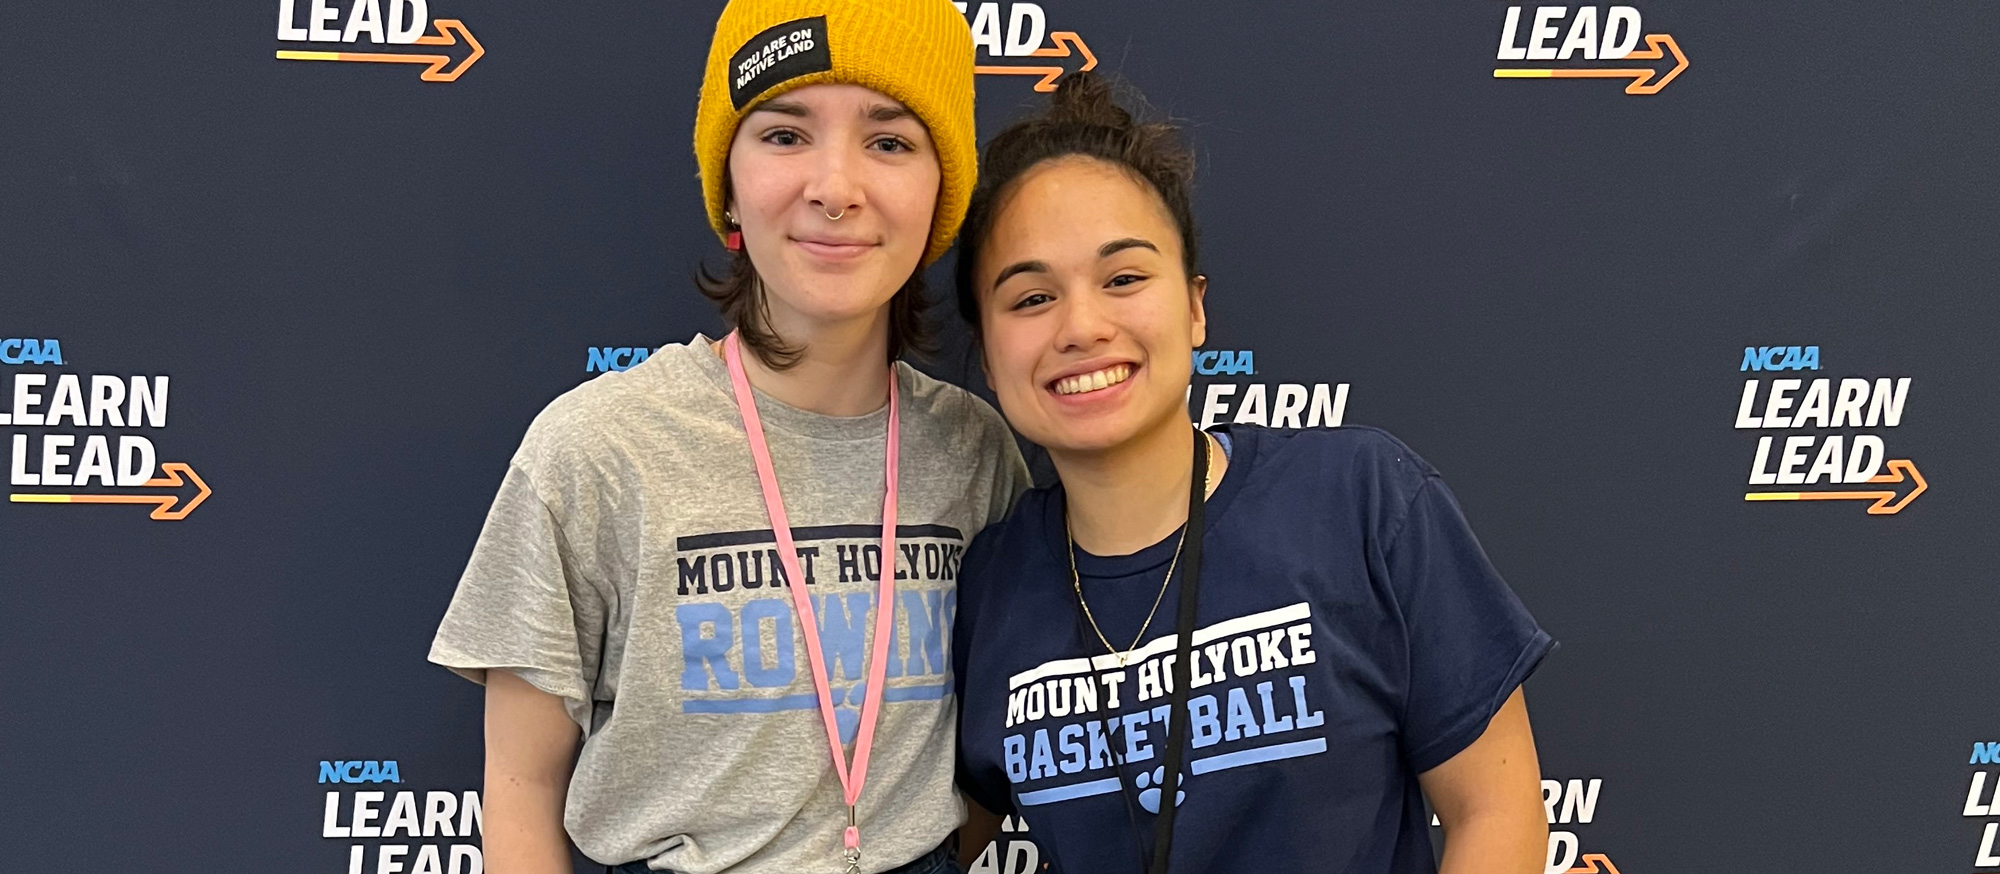 Tobin Mayo-Kiely (left) and Marley Berano represented Mount Holyoke Athletics at the NCAA Student-Athlete Leadership Forum held April 14-16 in Baltimore. (NCAA Photo)